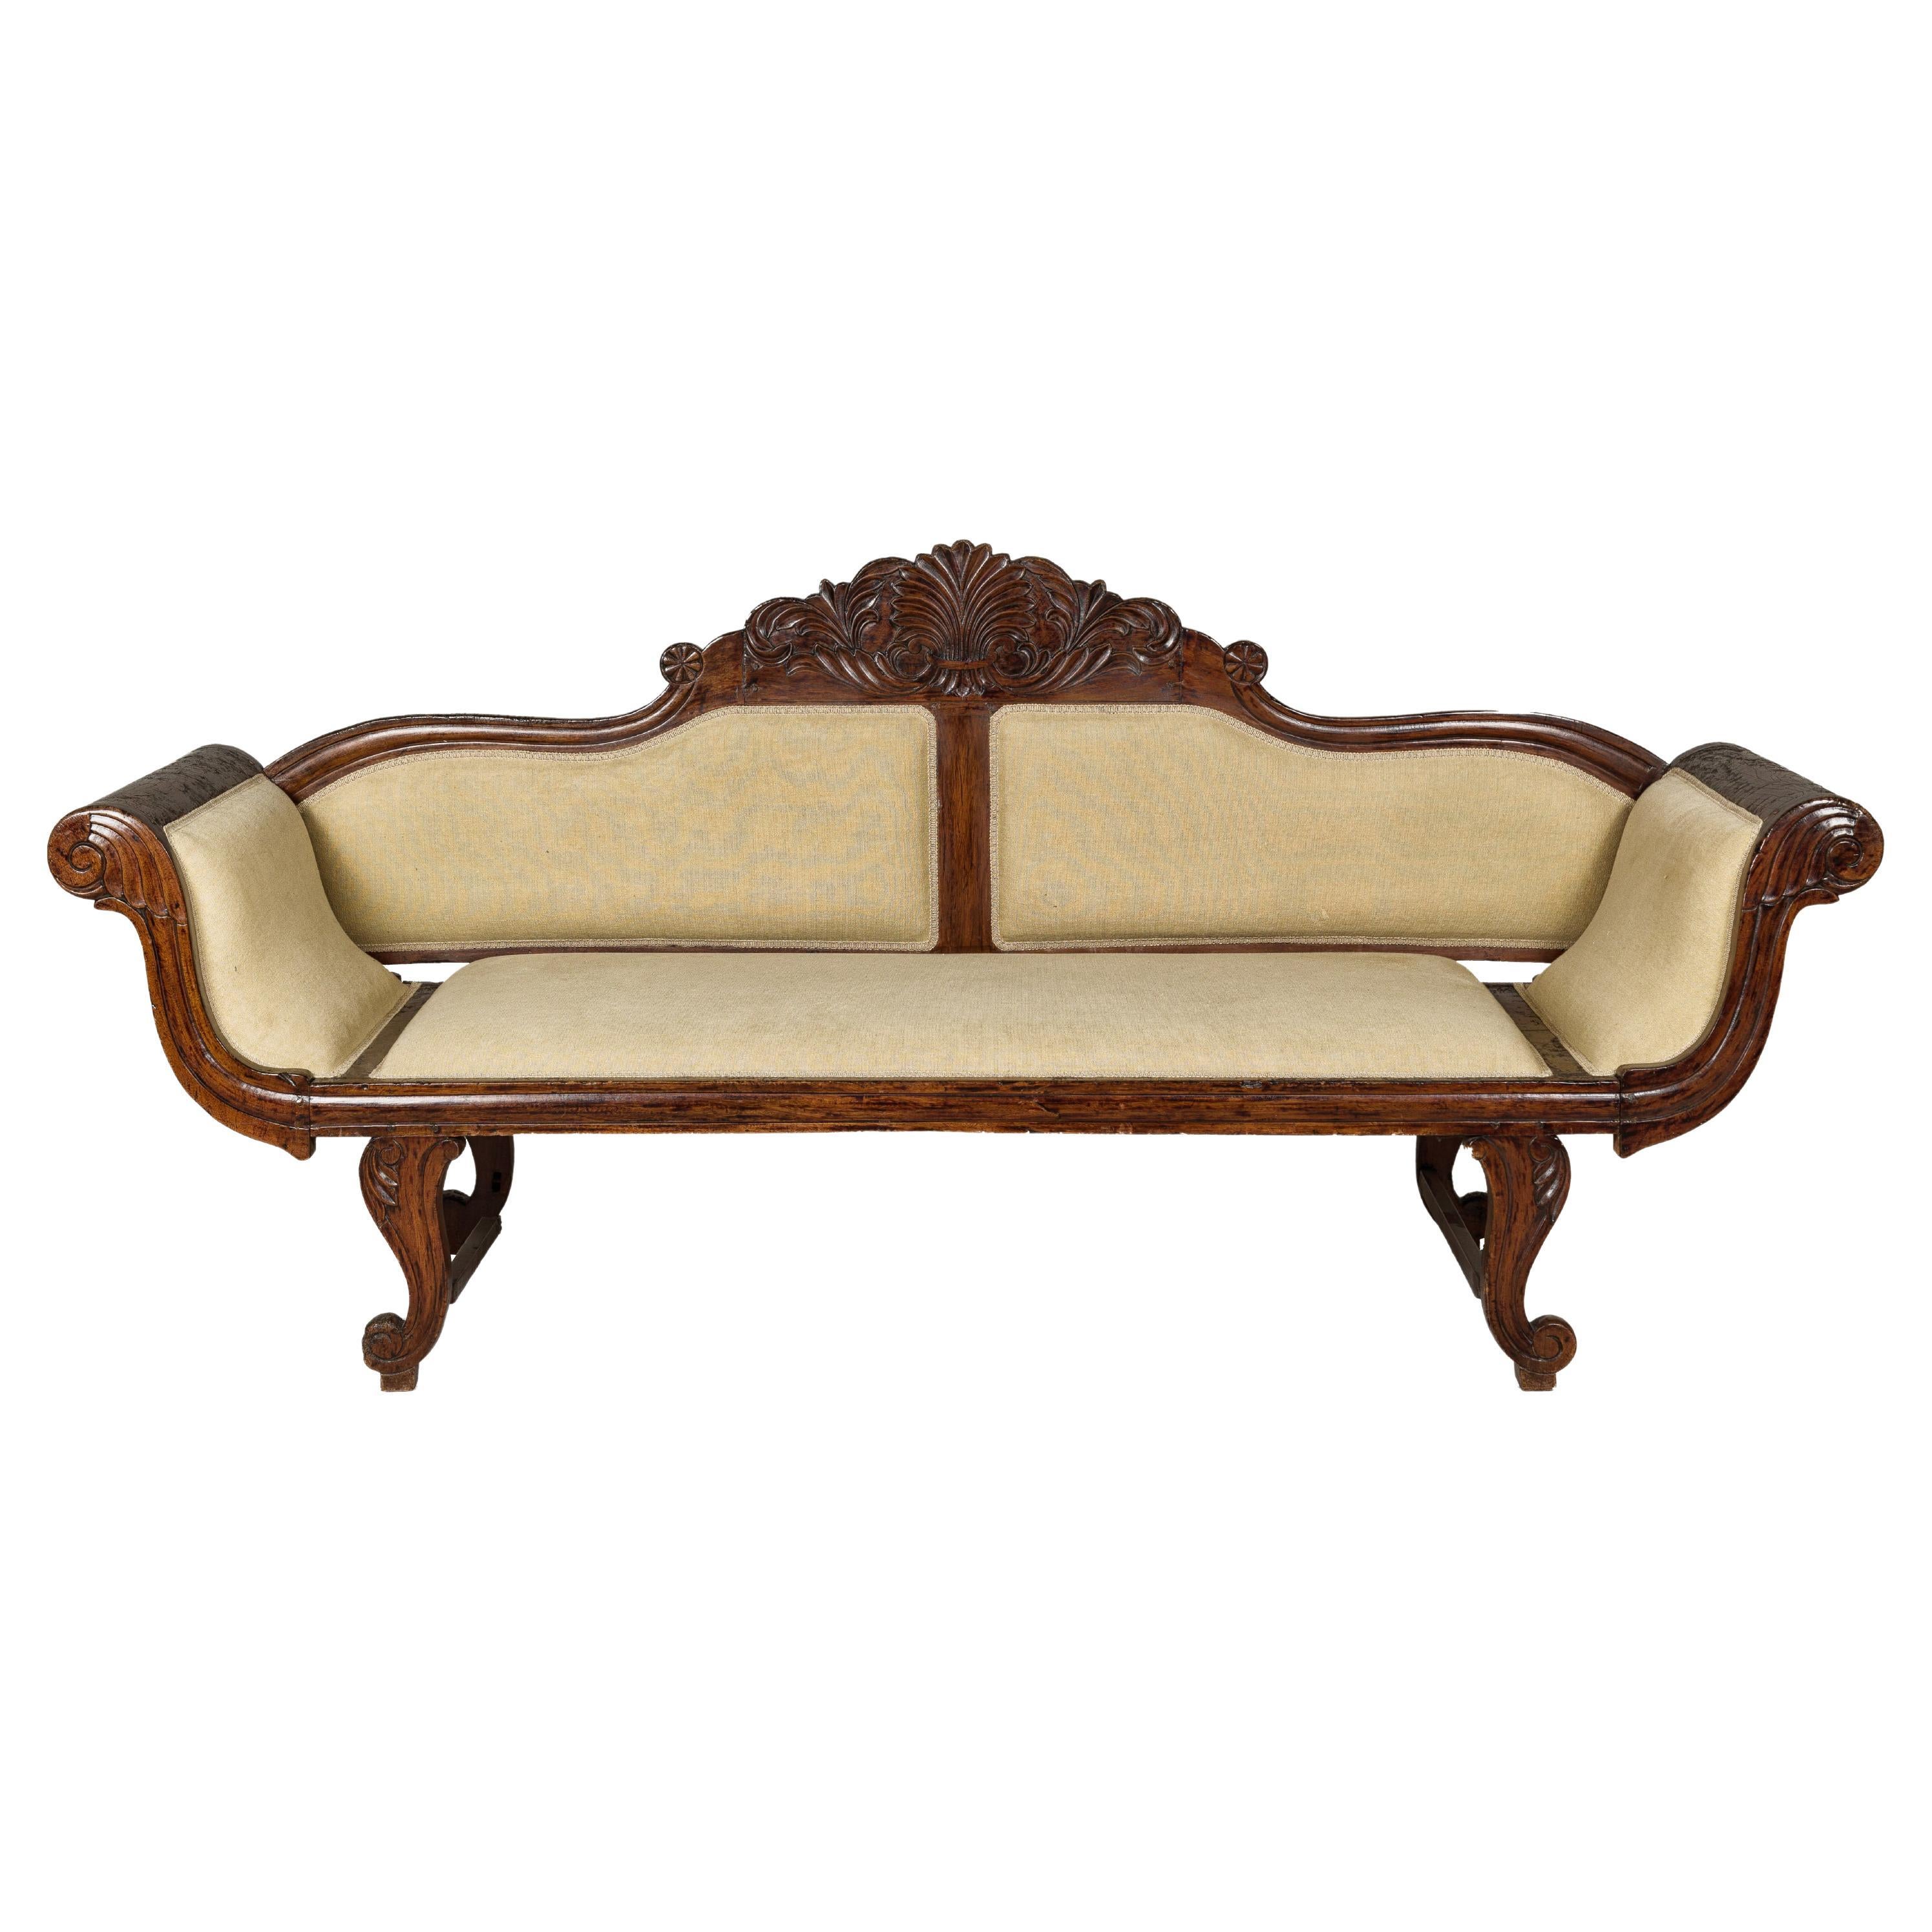 Dutch Colonial Wooden Settee with Carved Crest and Out-Scrolling Arms For Sale